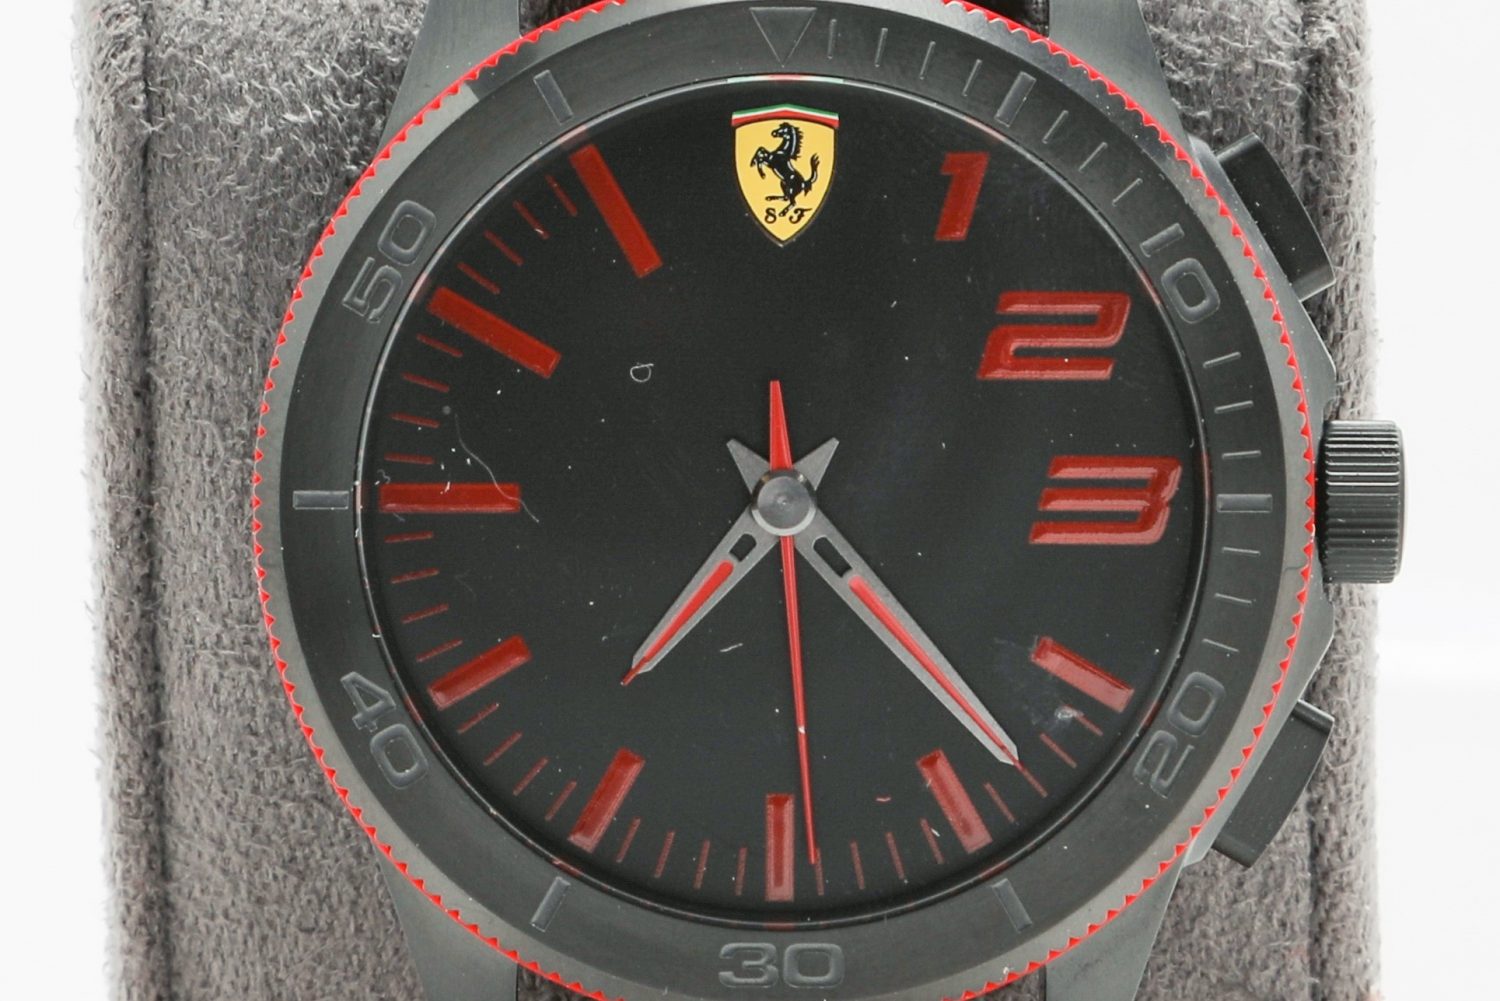 Photo of the Ferrari smartwatch powered by HP. It features a red watchband, red accents and a dark dial face.